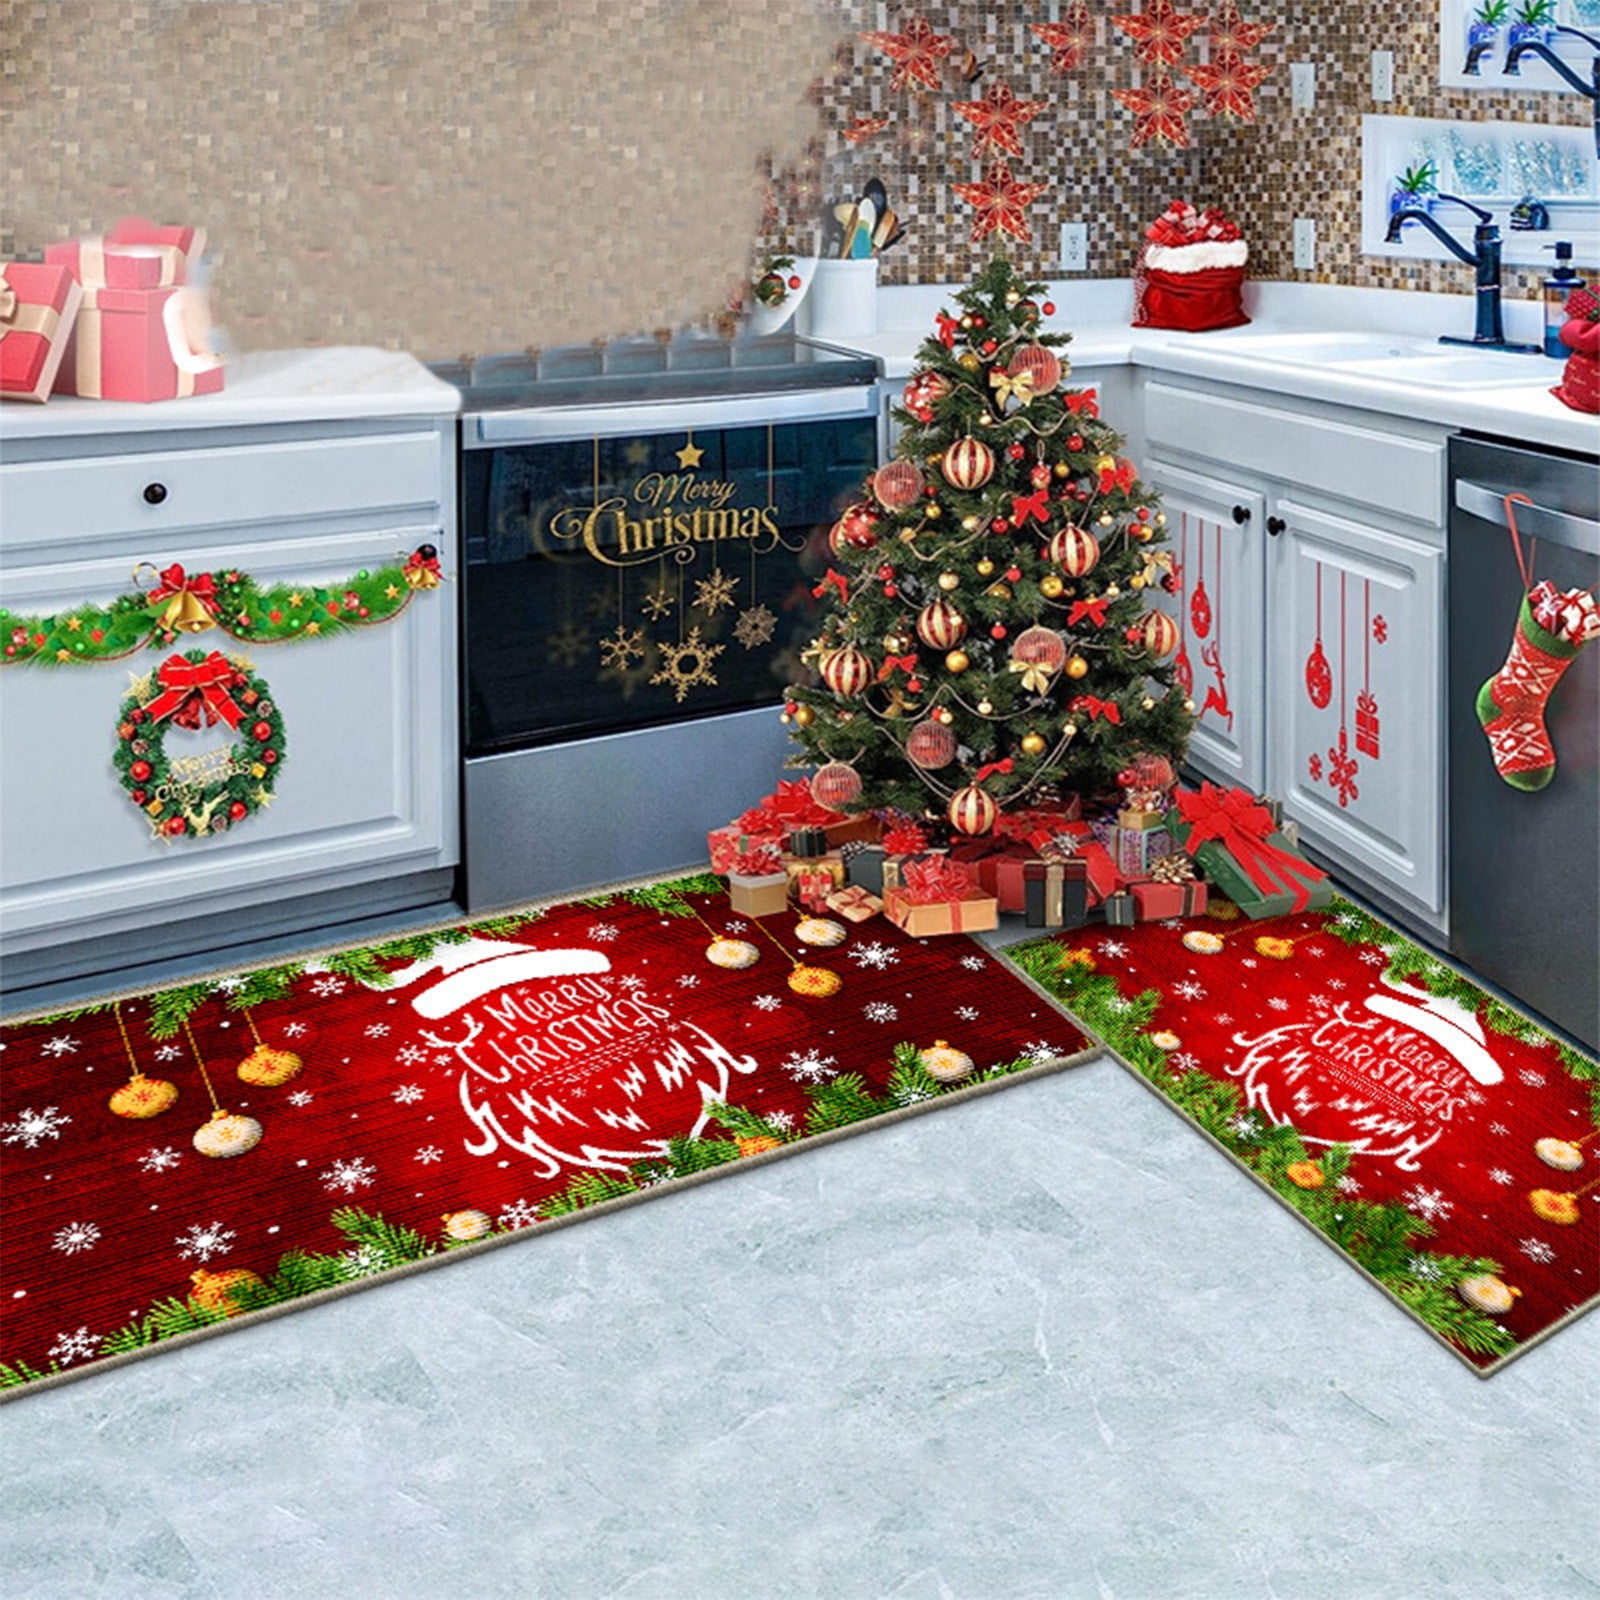 FAHXNVB Christmas Kitchen Rugs and Mats Set of 2, Non Slip Winter Holiday Kitchen Rug Christmas Decorations for Home Seasonal Low-Profile Kitchen Floor Mat